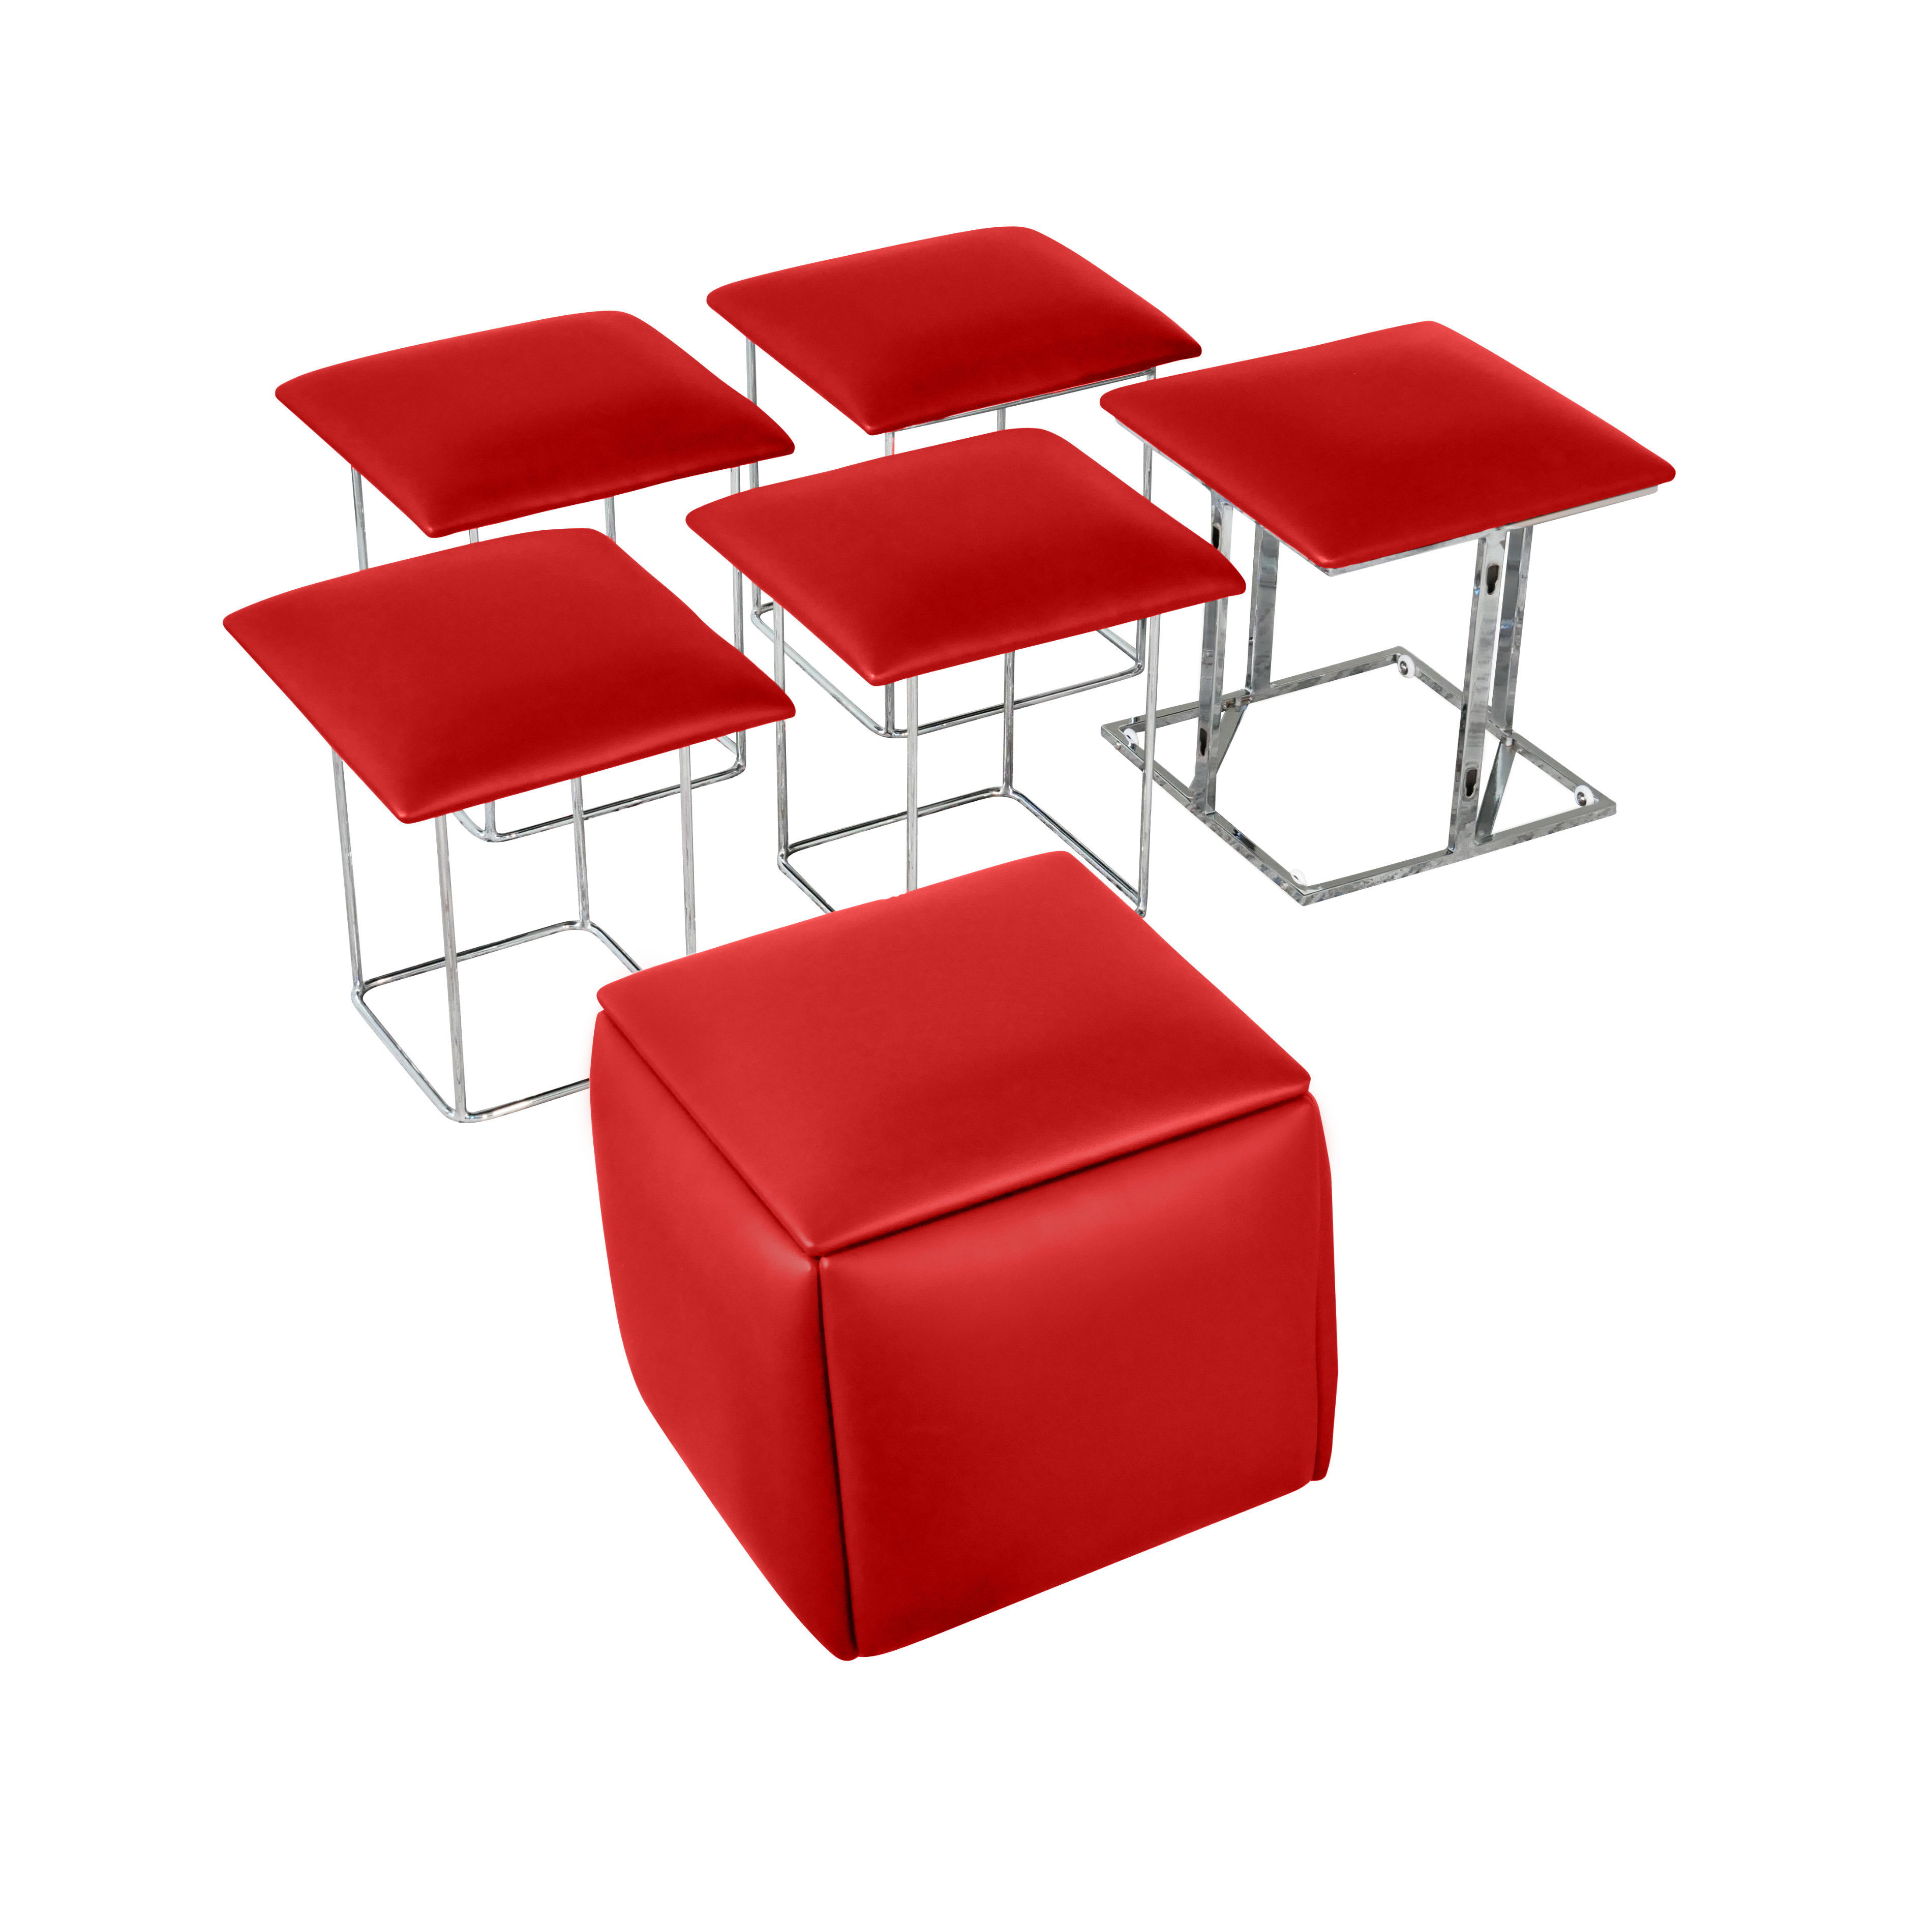 https://expandfurniture.com/wp-content/uploads/2017/10/Companion-Cube-5-in-1-seats-in-red-eco-leather-ottoman-space-saver.jpg